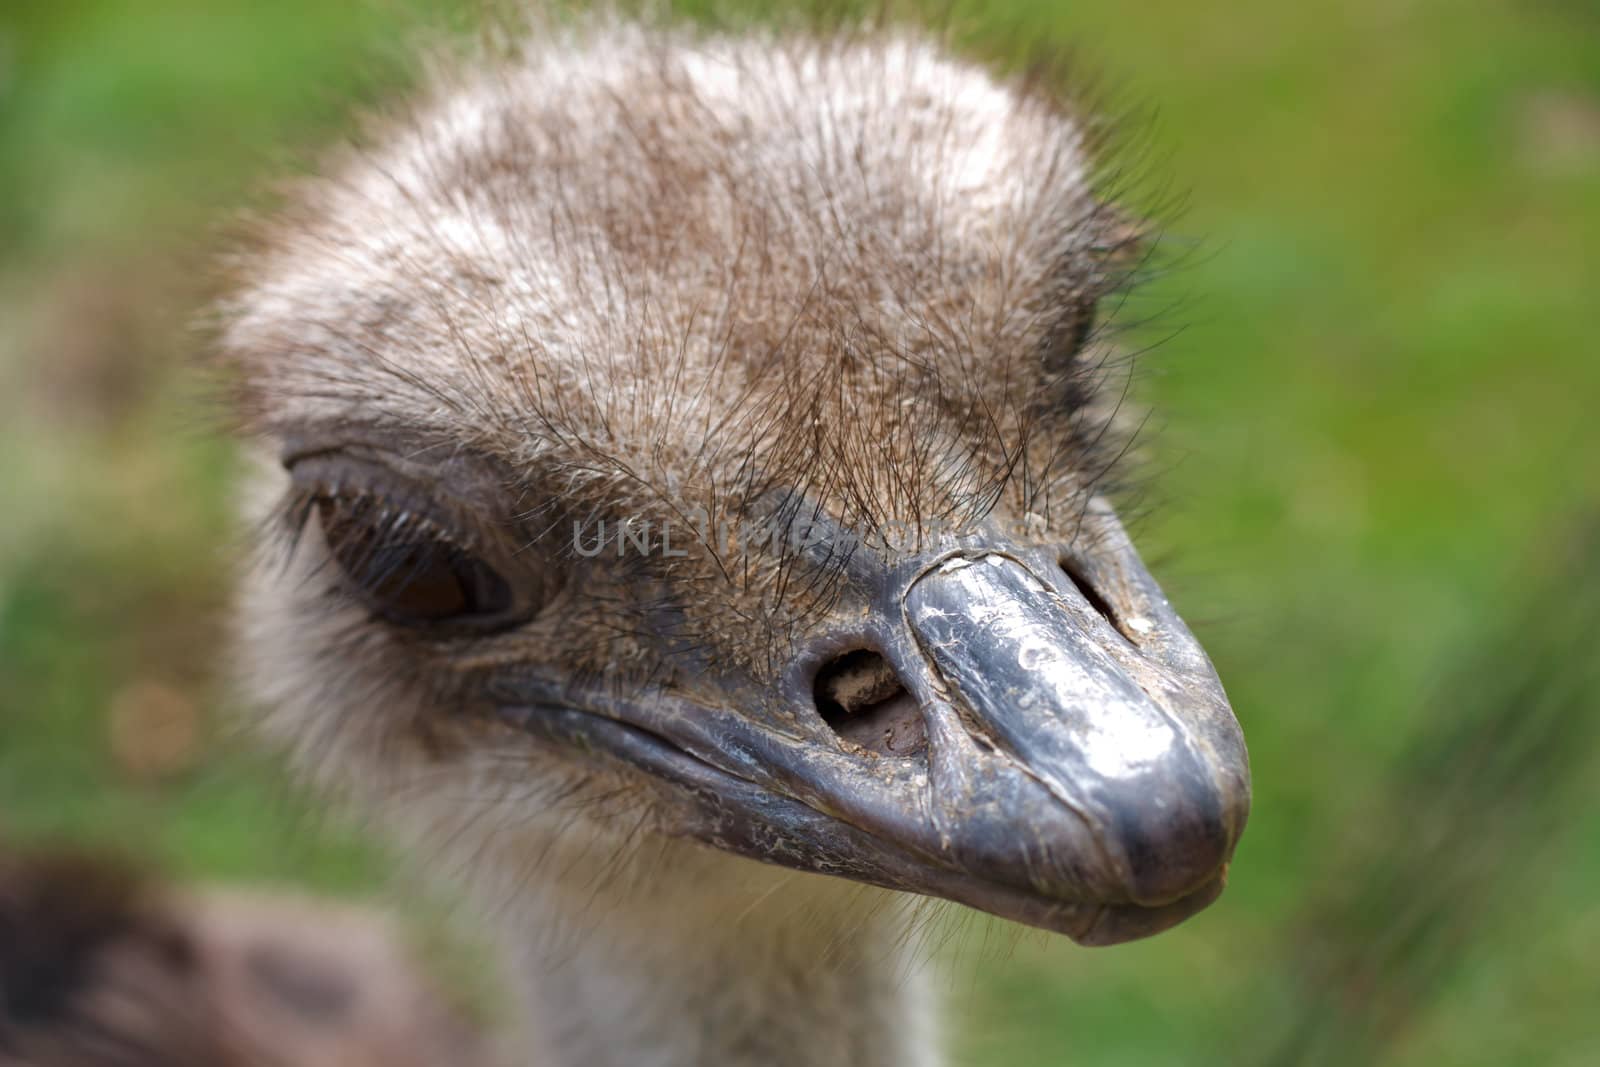 Ostrich head side view over blur green sunny background	

